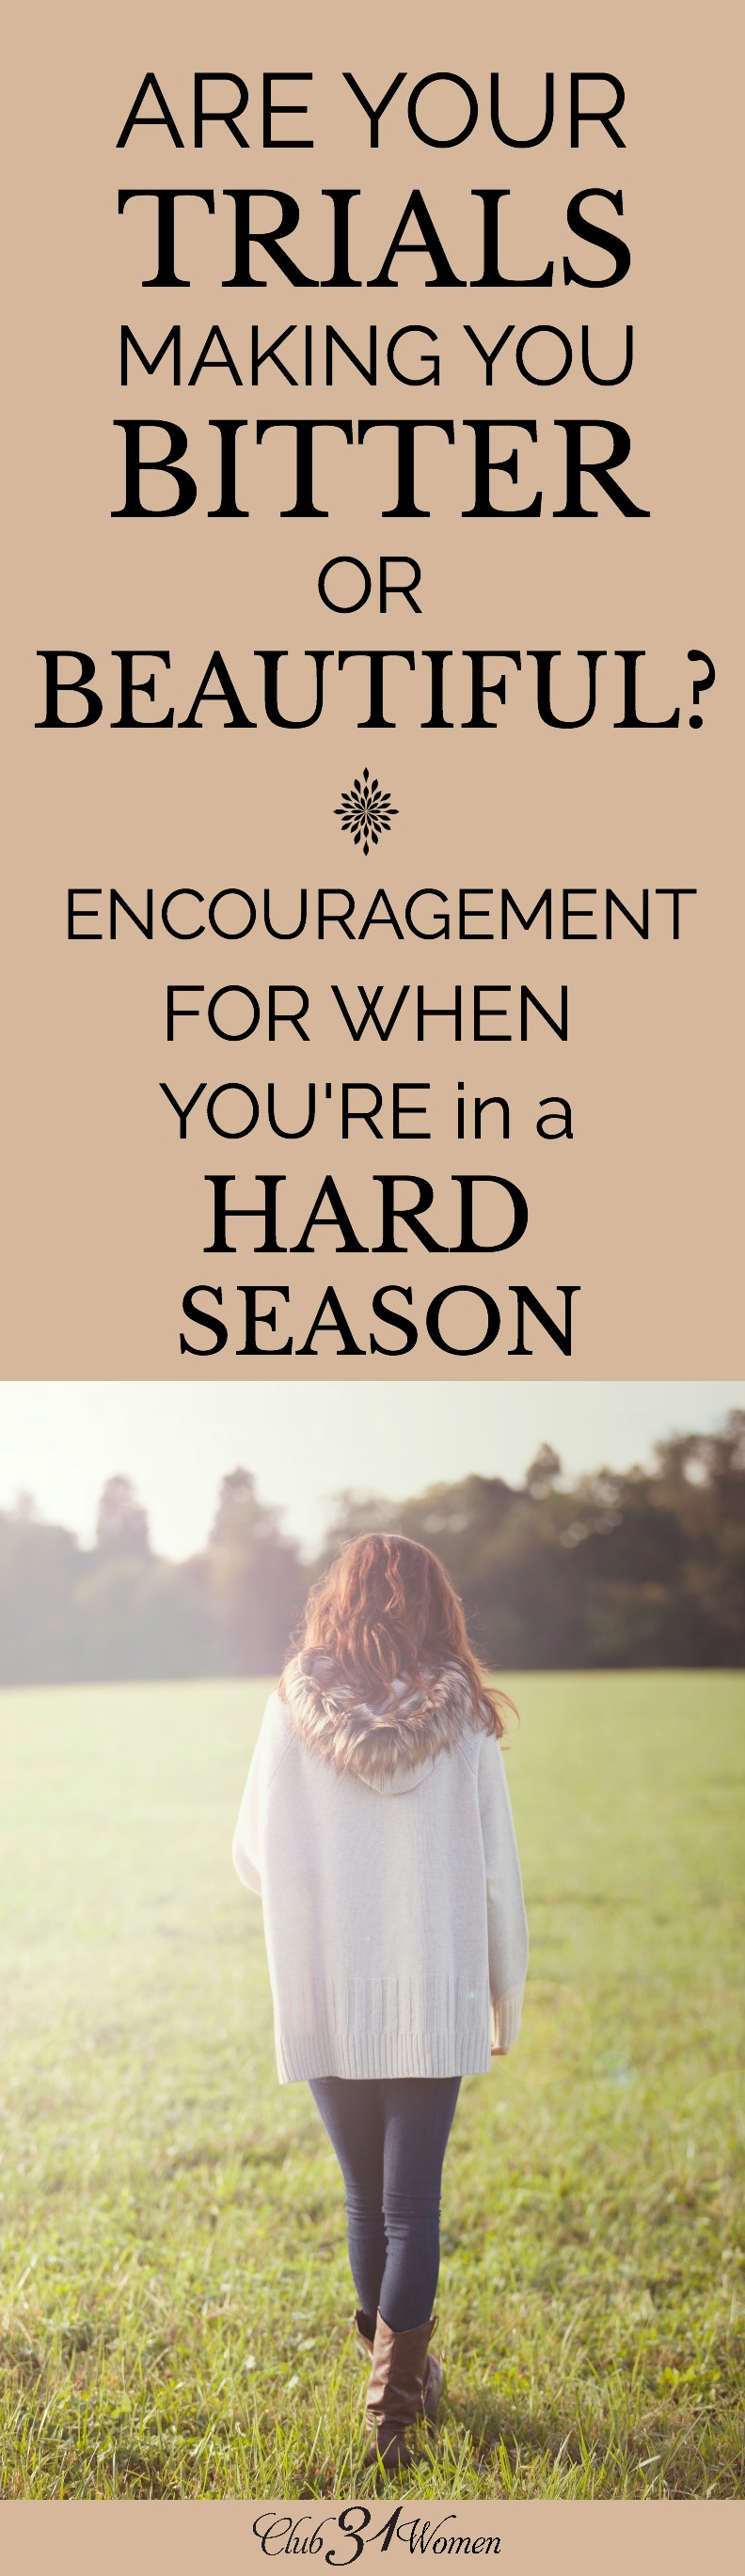 When you're going through a trial, do you allow it to refine you or does it make you bitter? Here is some encouragement when you're facing hard times. via @Club31Women